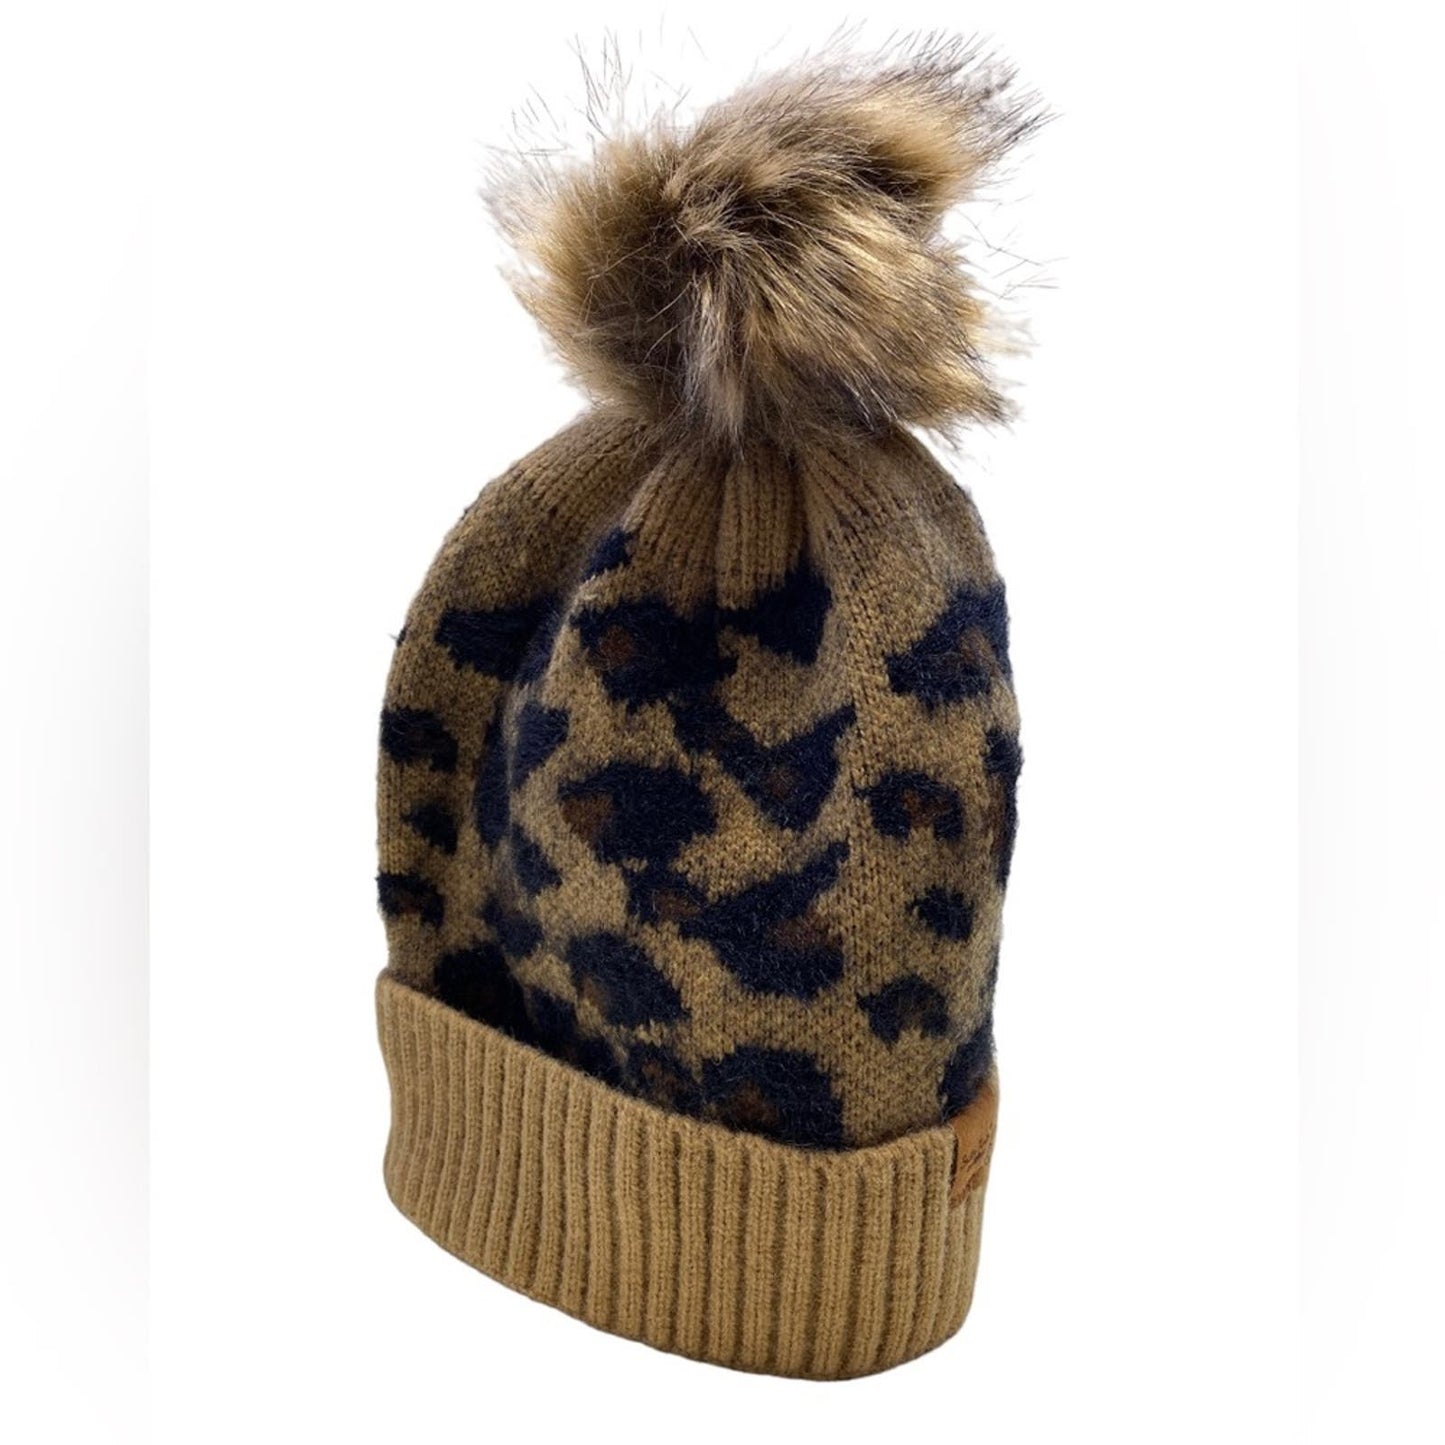 Britts Knits Tan Black Animal Print Hat with Pom